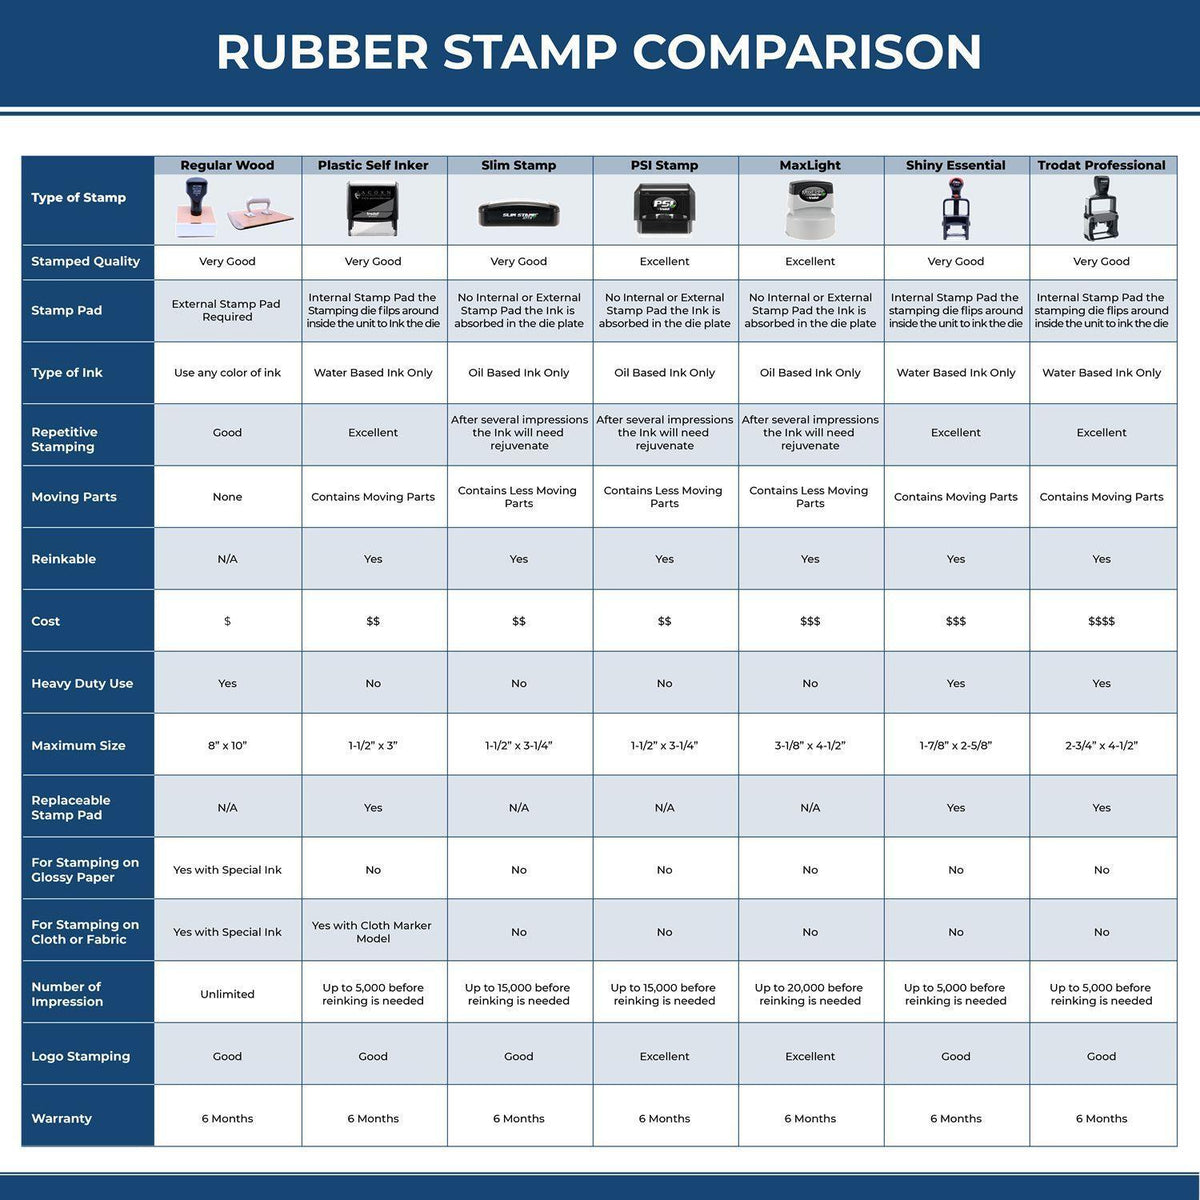 Large Narrow Benefits Assigned Rubber Stamp 4860R Rubber Stamp Comparison